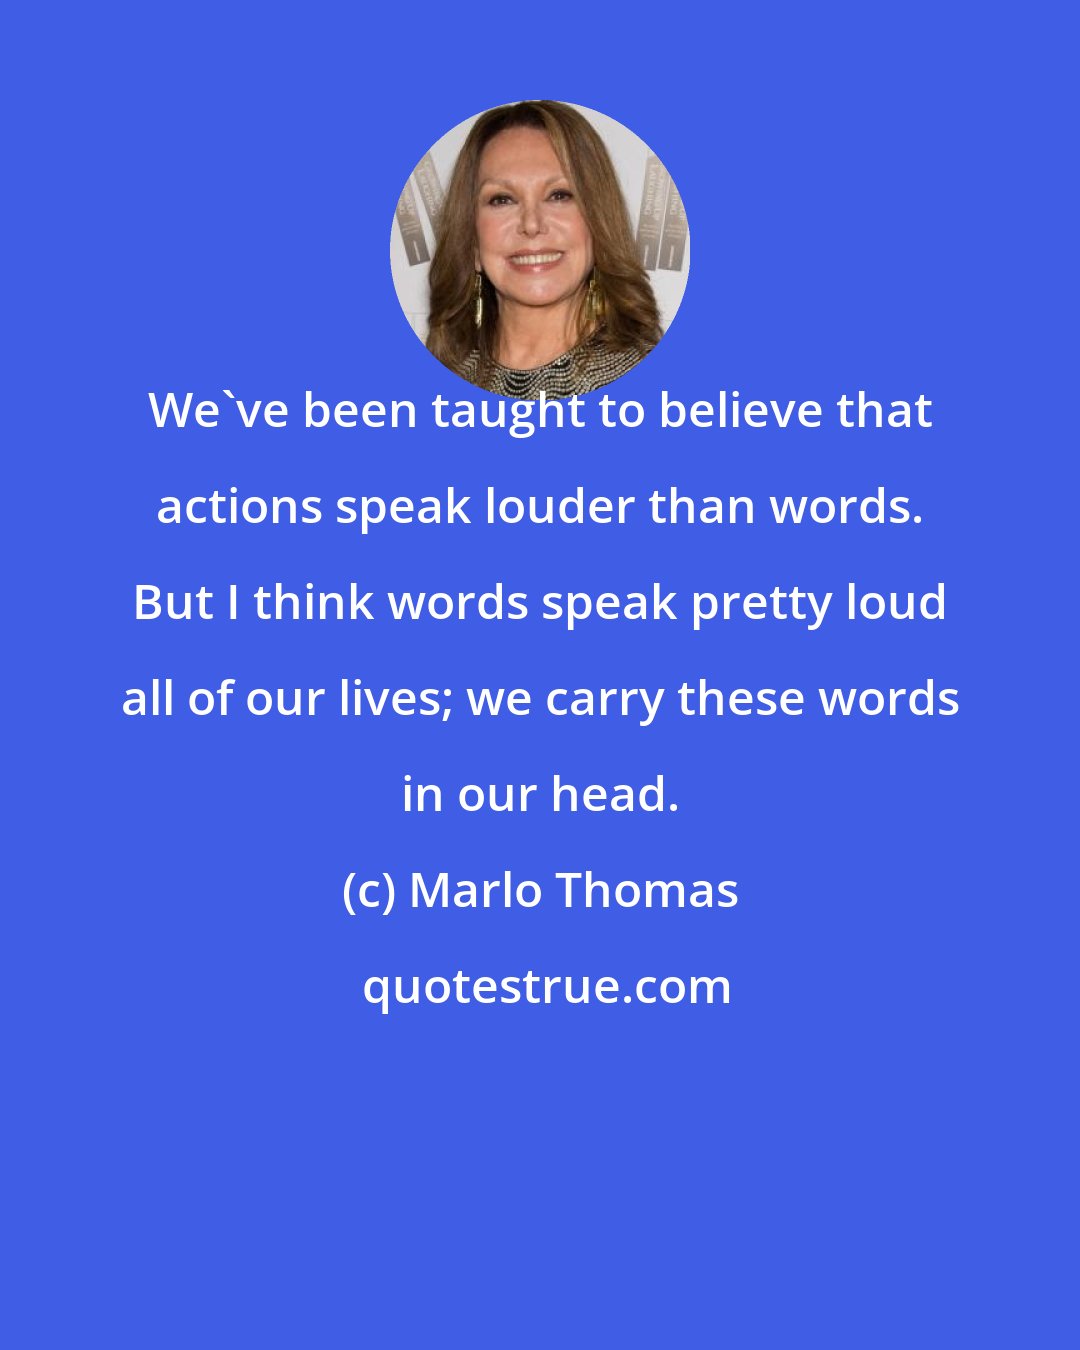 Marlo Thomas: We've been taught to believe that actions speak louder than words. But I think words speak pretty loud all of our lives; we carry these words in our head.